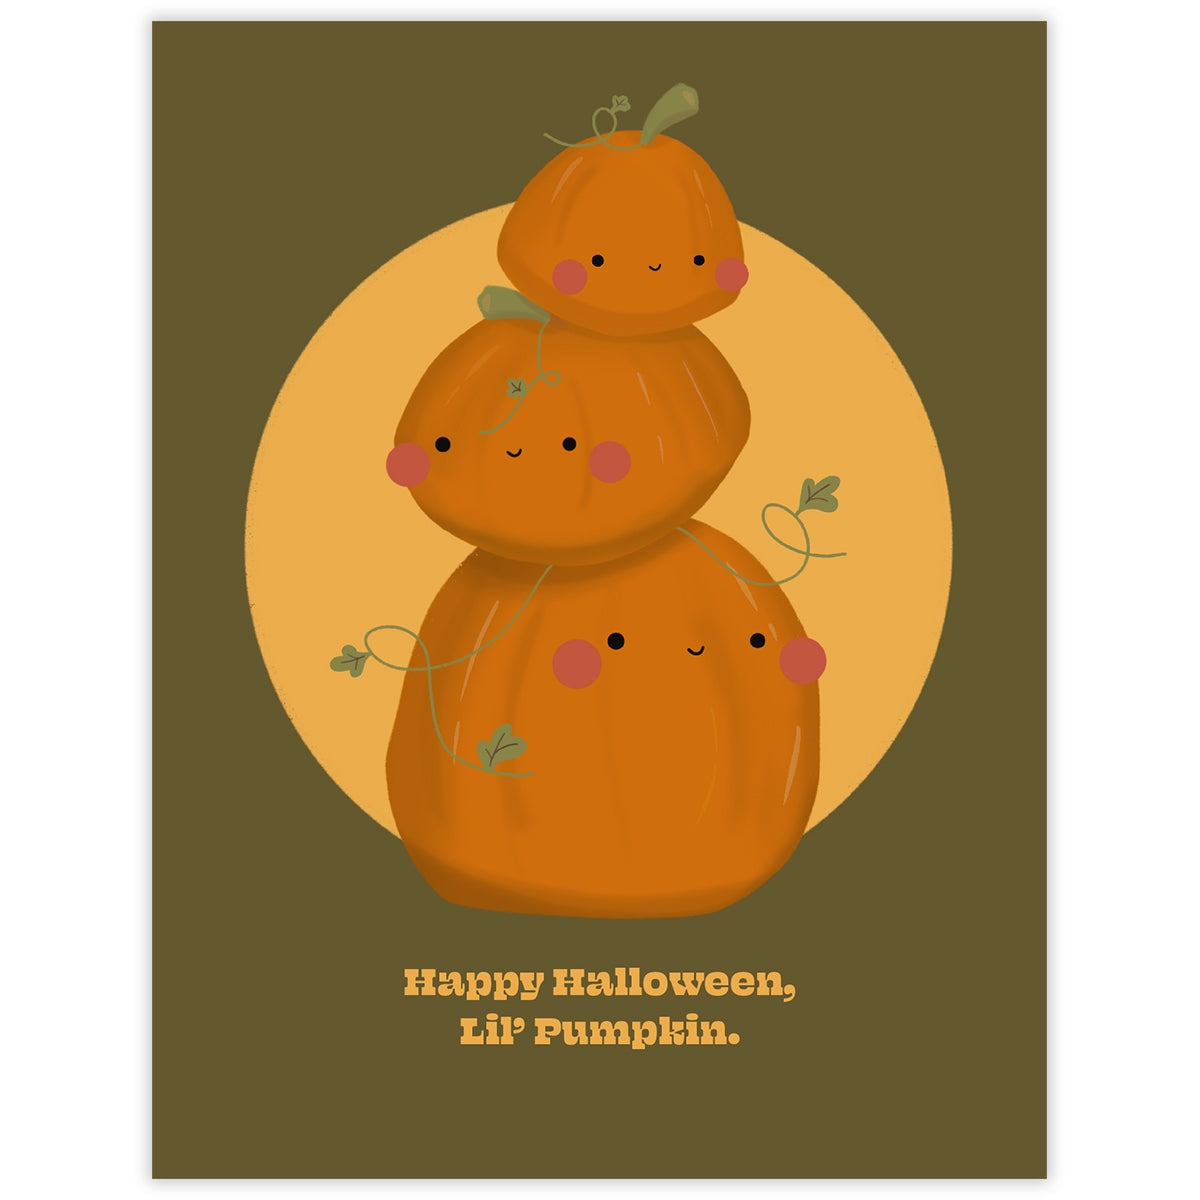 Greeting Card with illustrated stack of 3 smiling pumpkins that reads 'happy halloween lil' pumpkin'